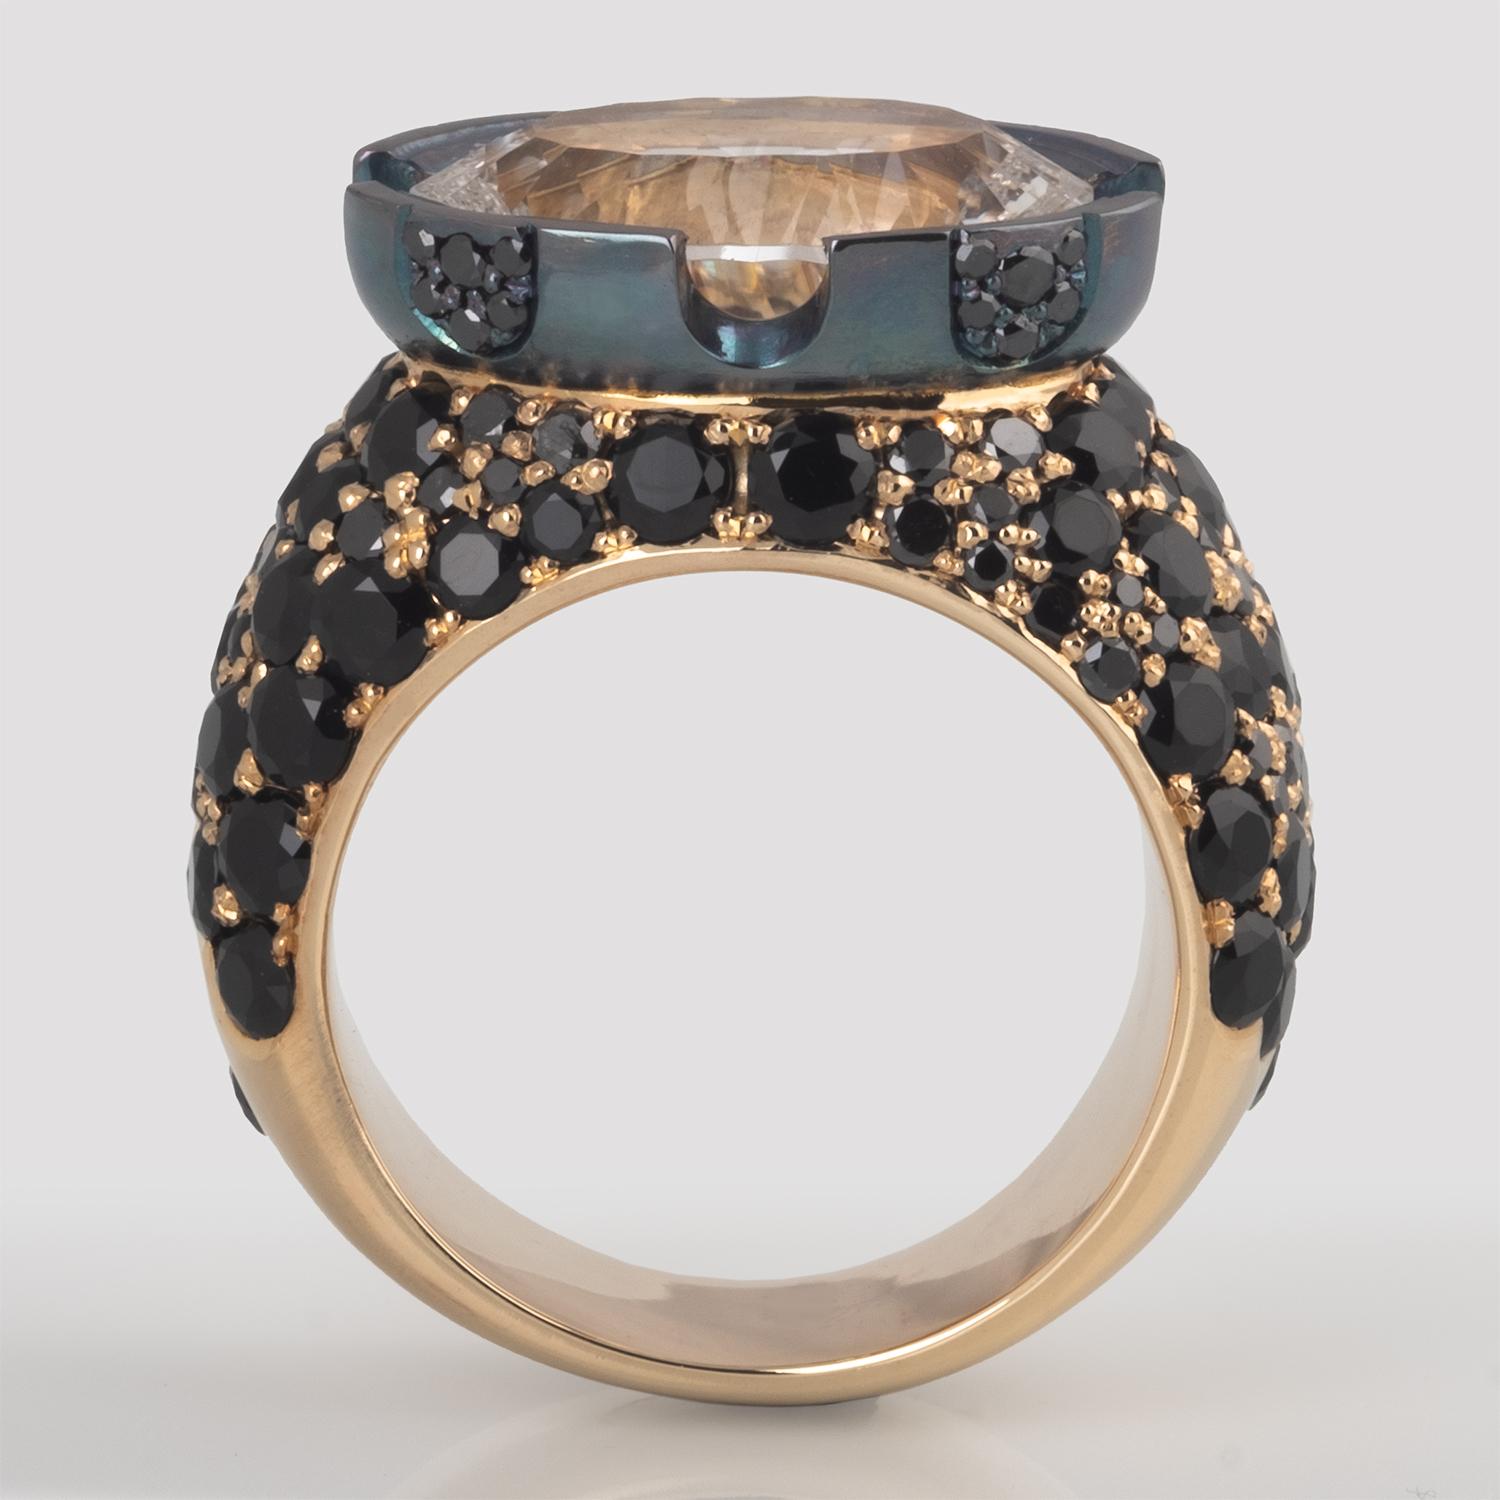 The unique cut of the 7.74 carat oval White Quartz gemstone was the inspiration for this one of a kind ring. A mix of black Diamonds and black Spinels surround the blackened sterling silver bezel. The bezel features cutouts that echo the concave